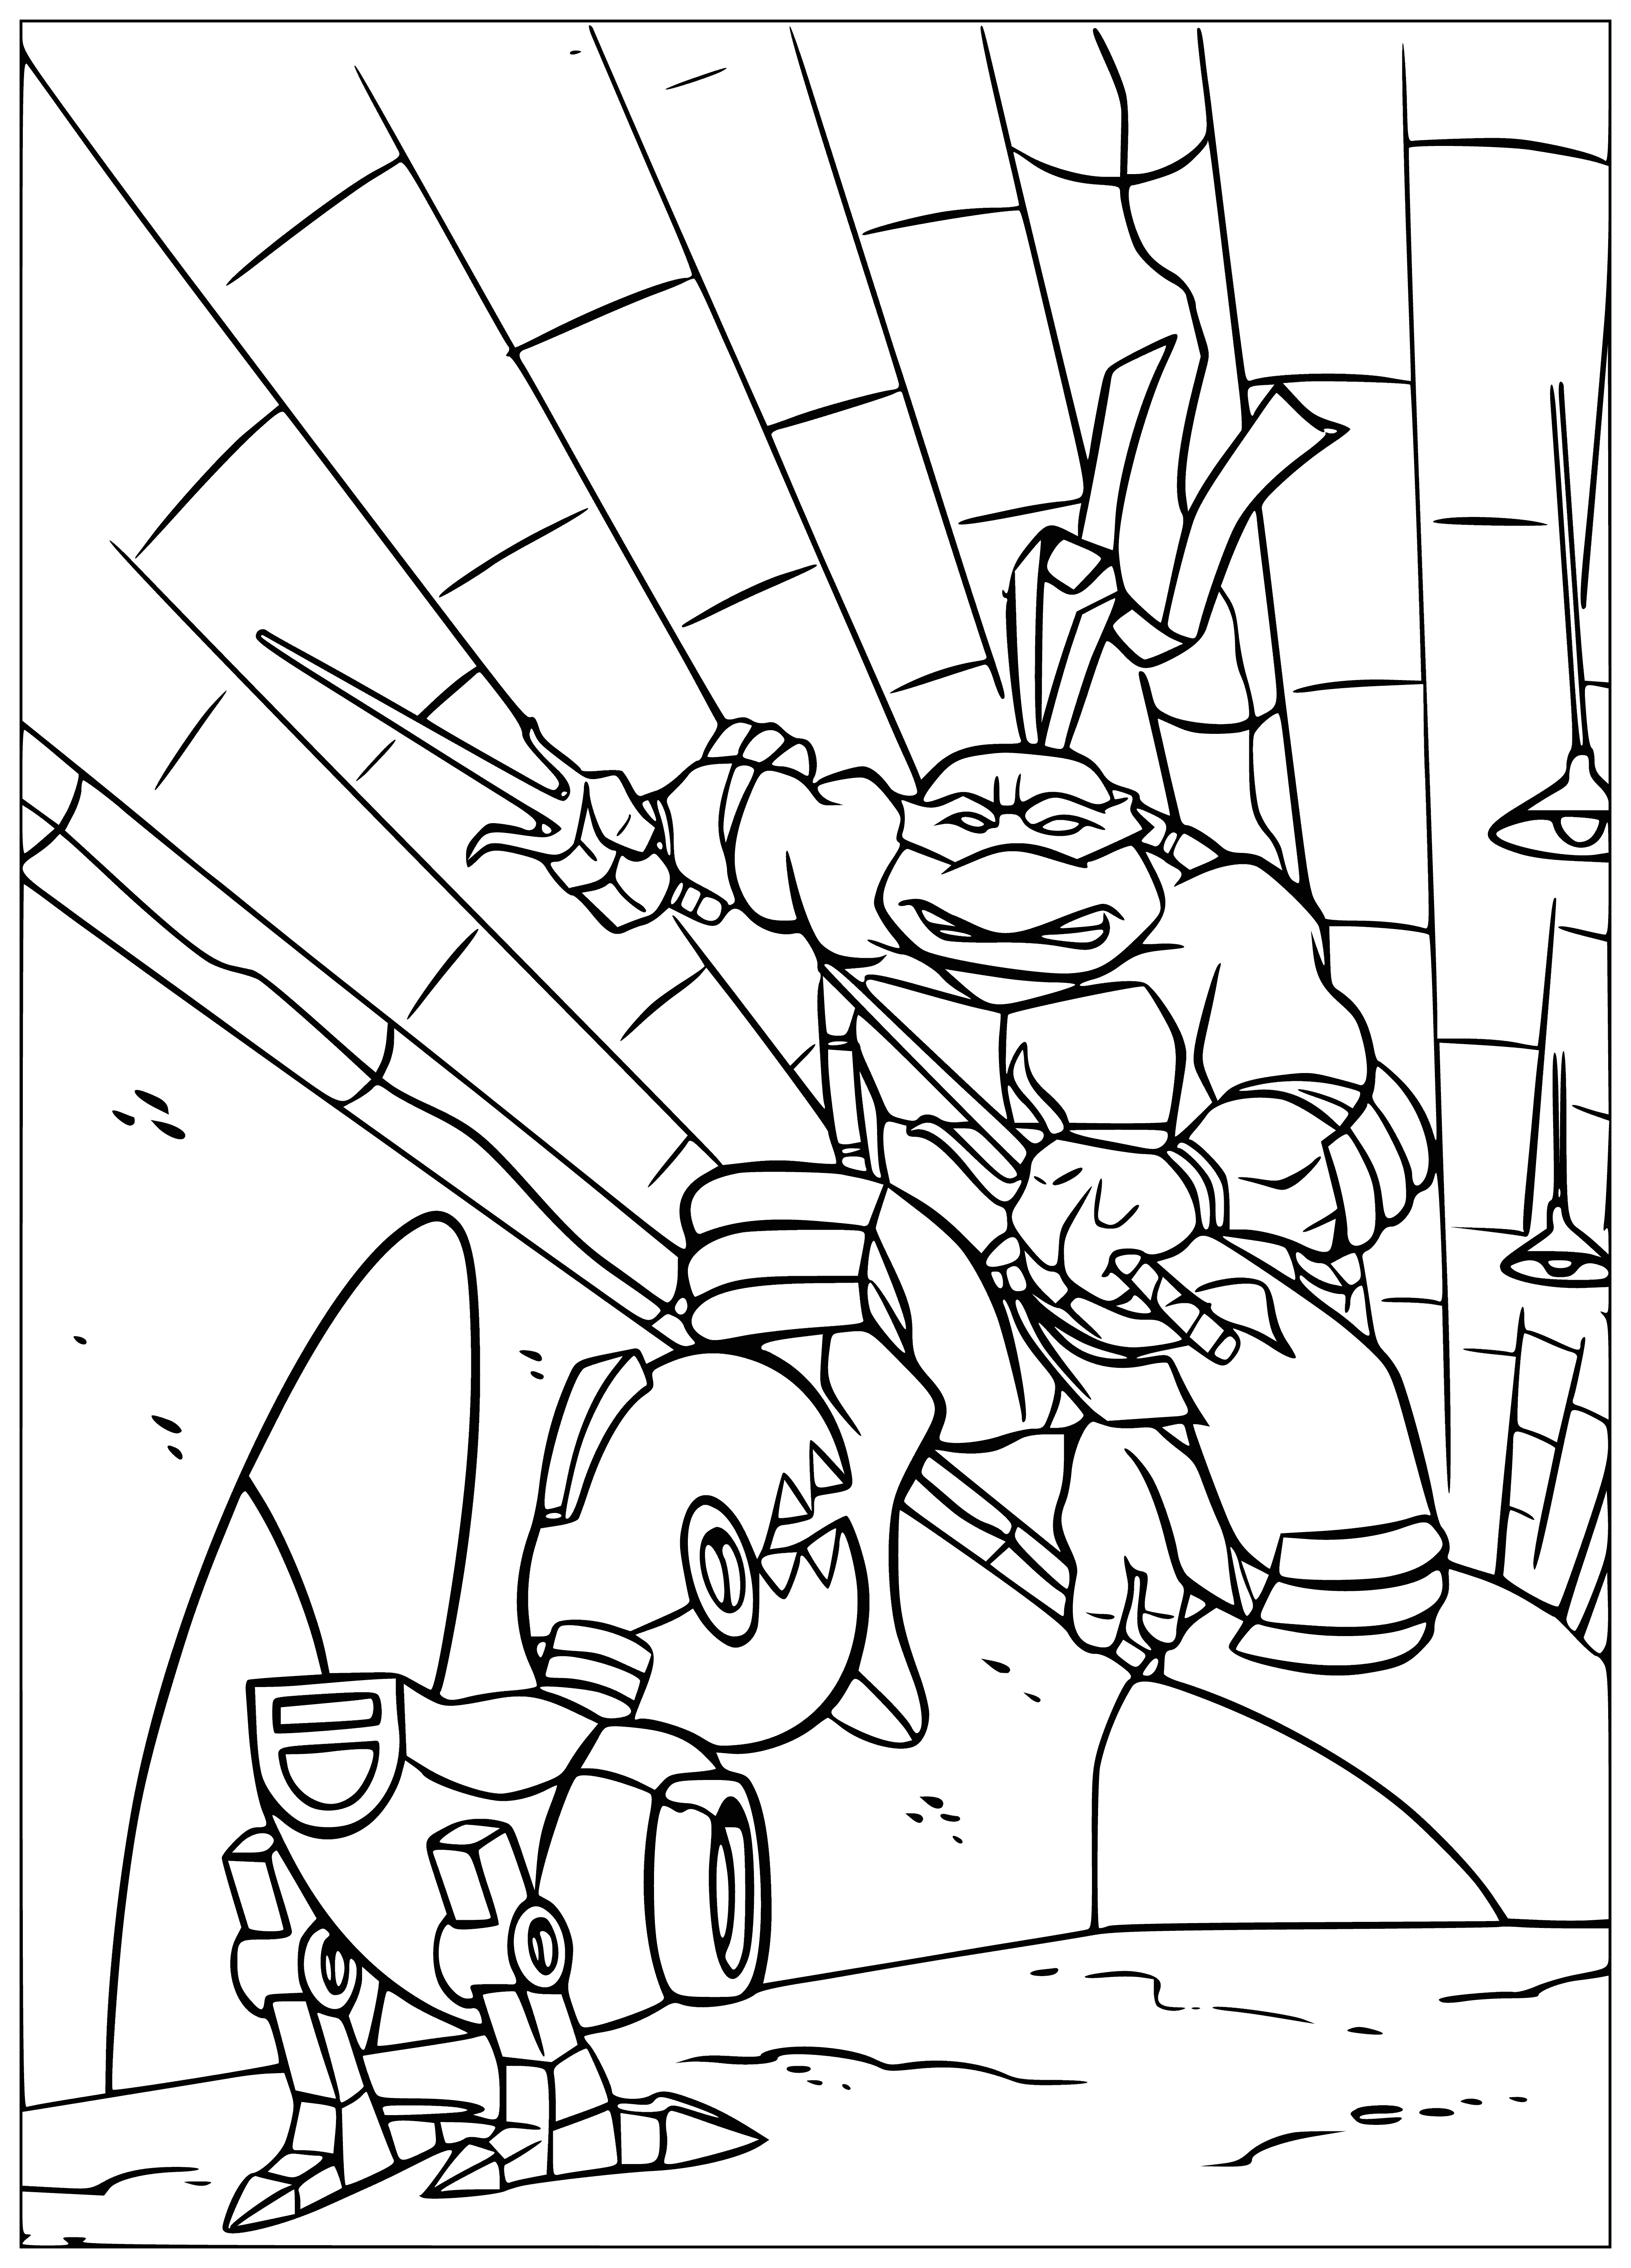 Raphael and the robot coloring page